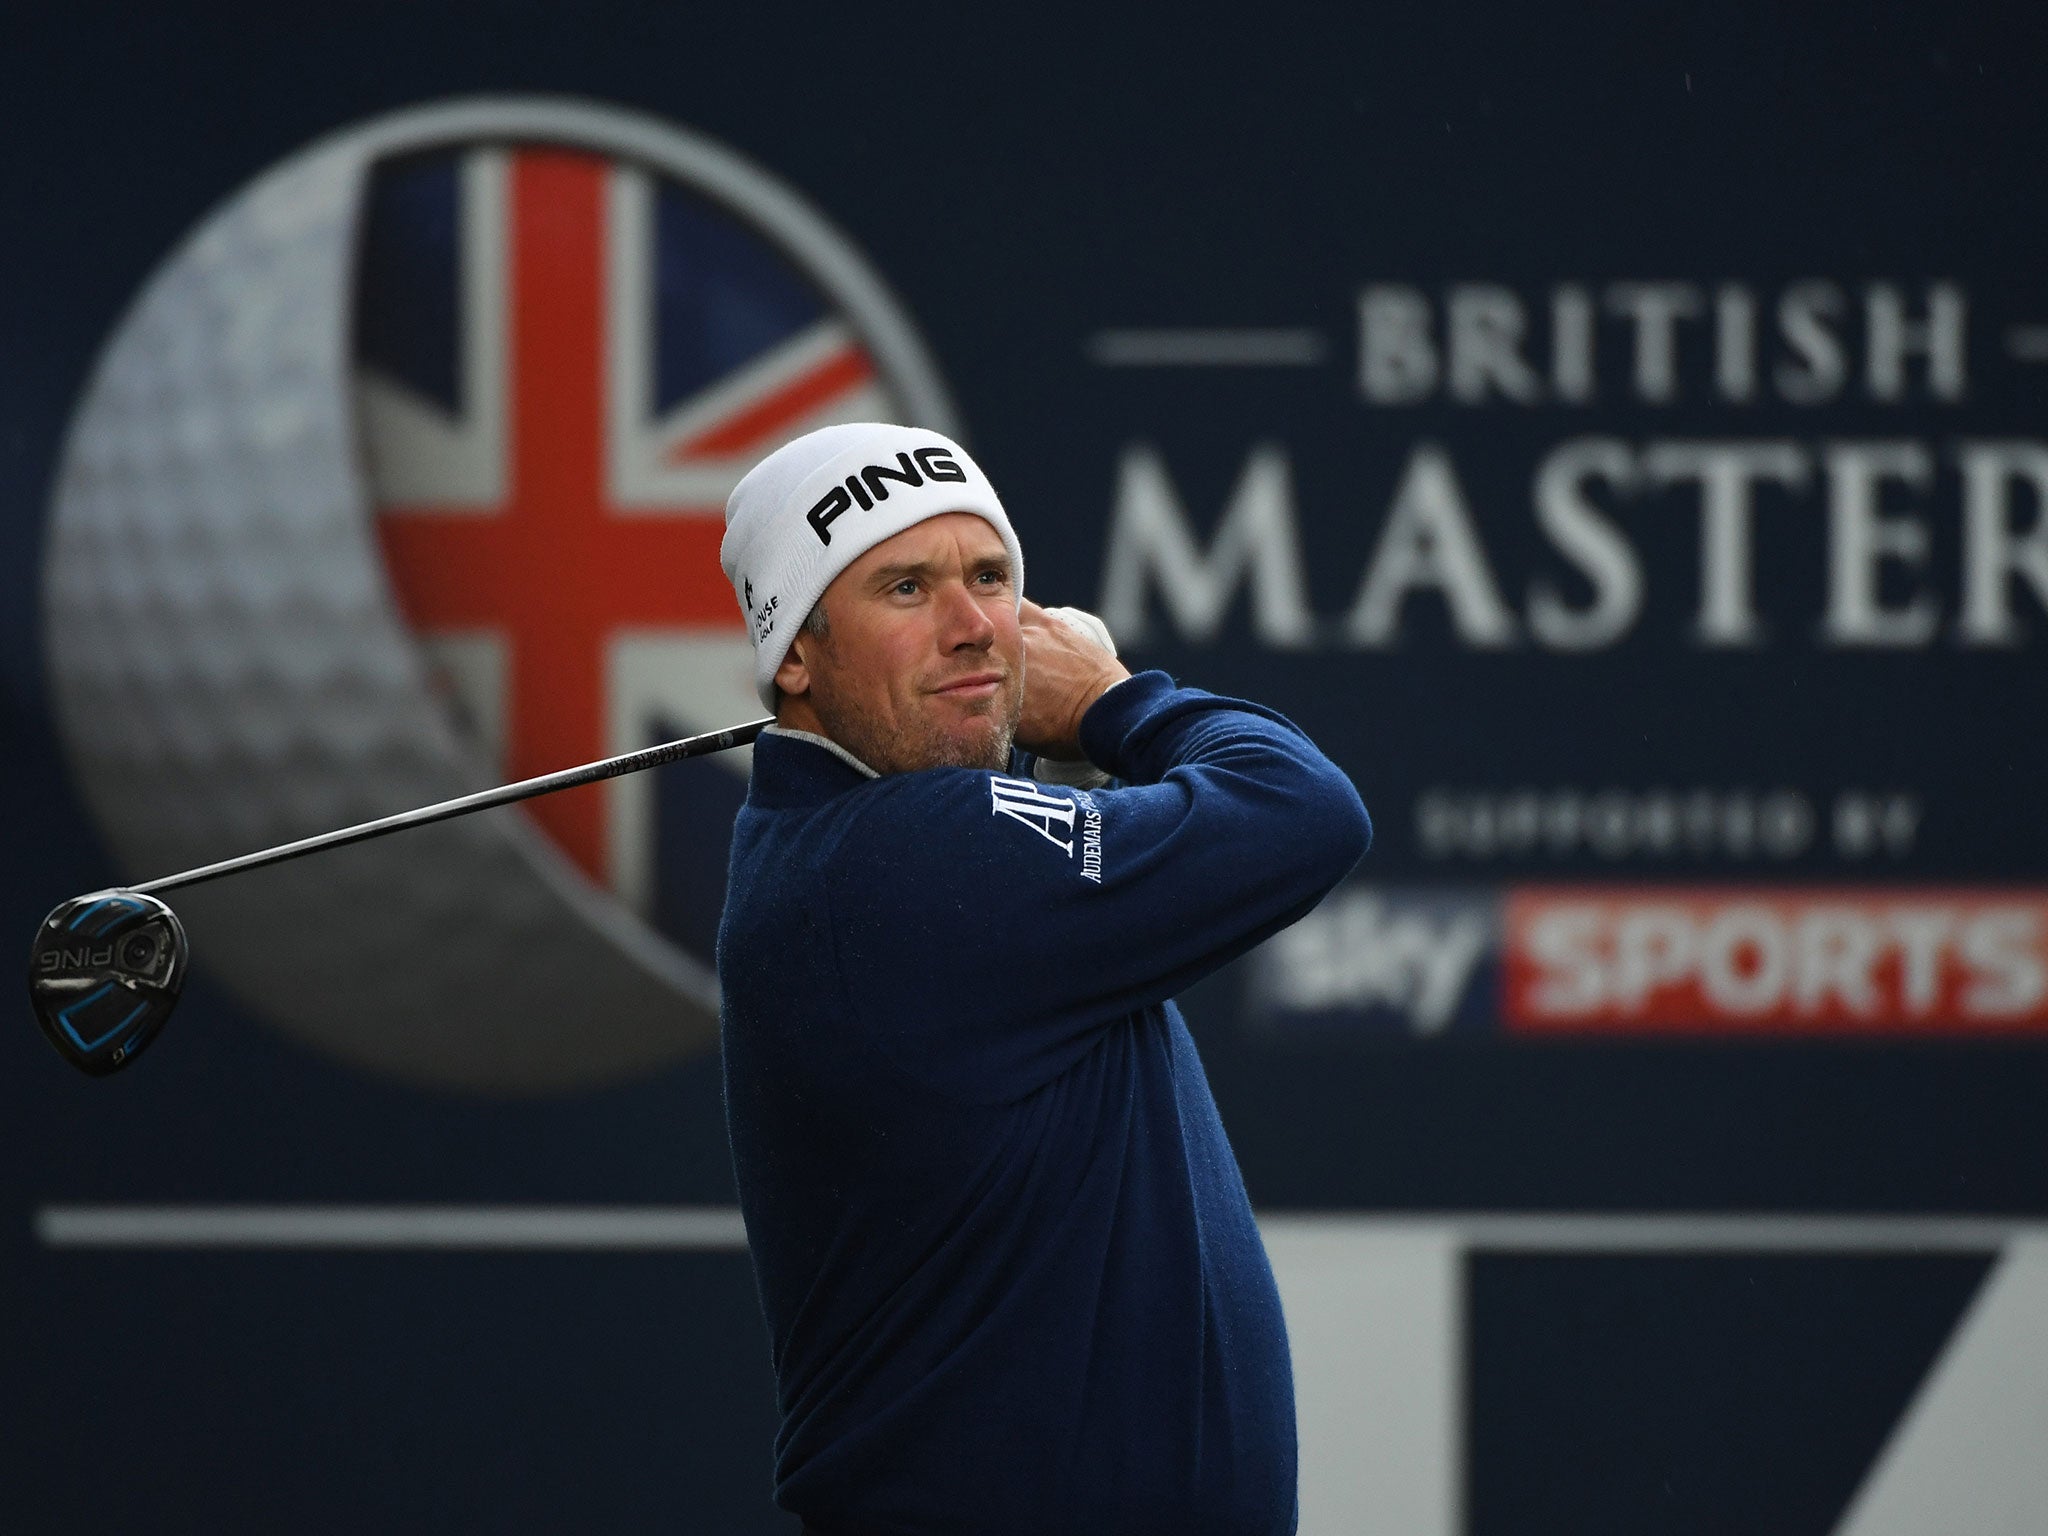 Lee Westwood is set to wait until 2022 to become Ryder Cup captain